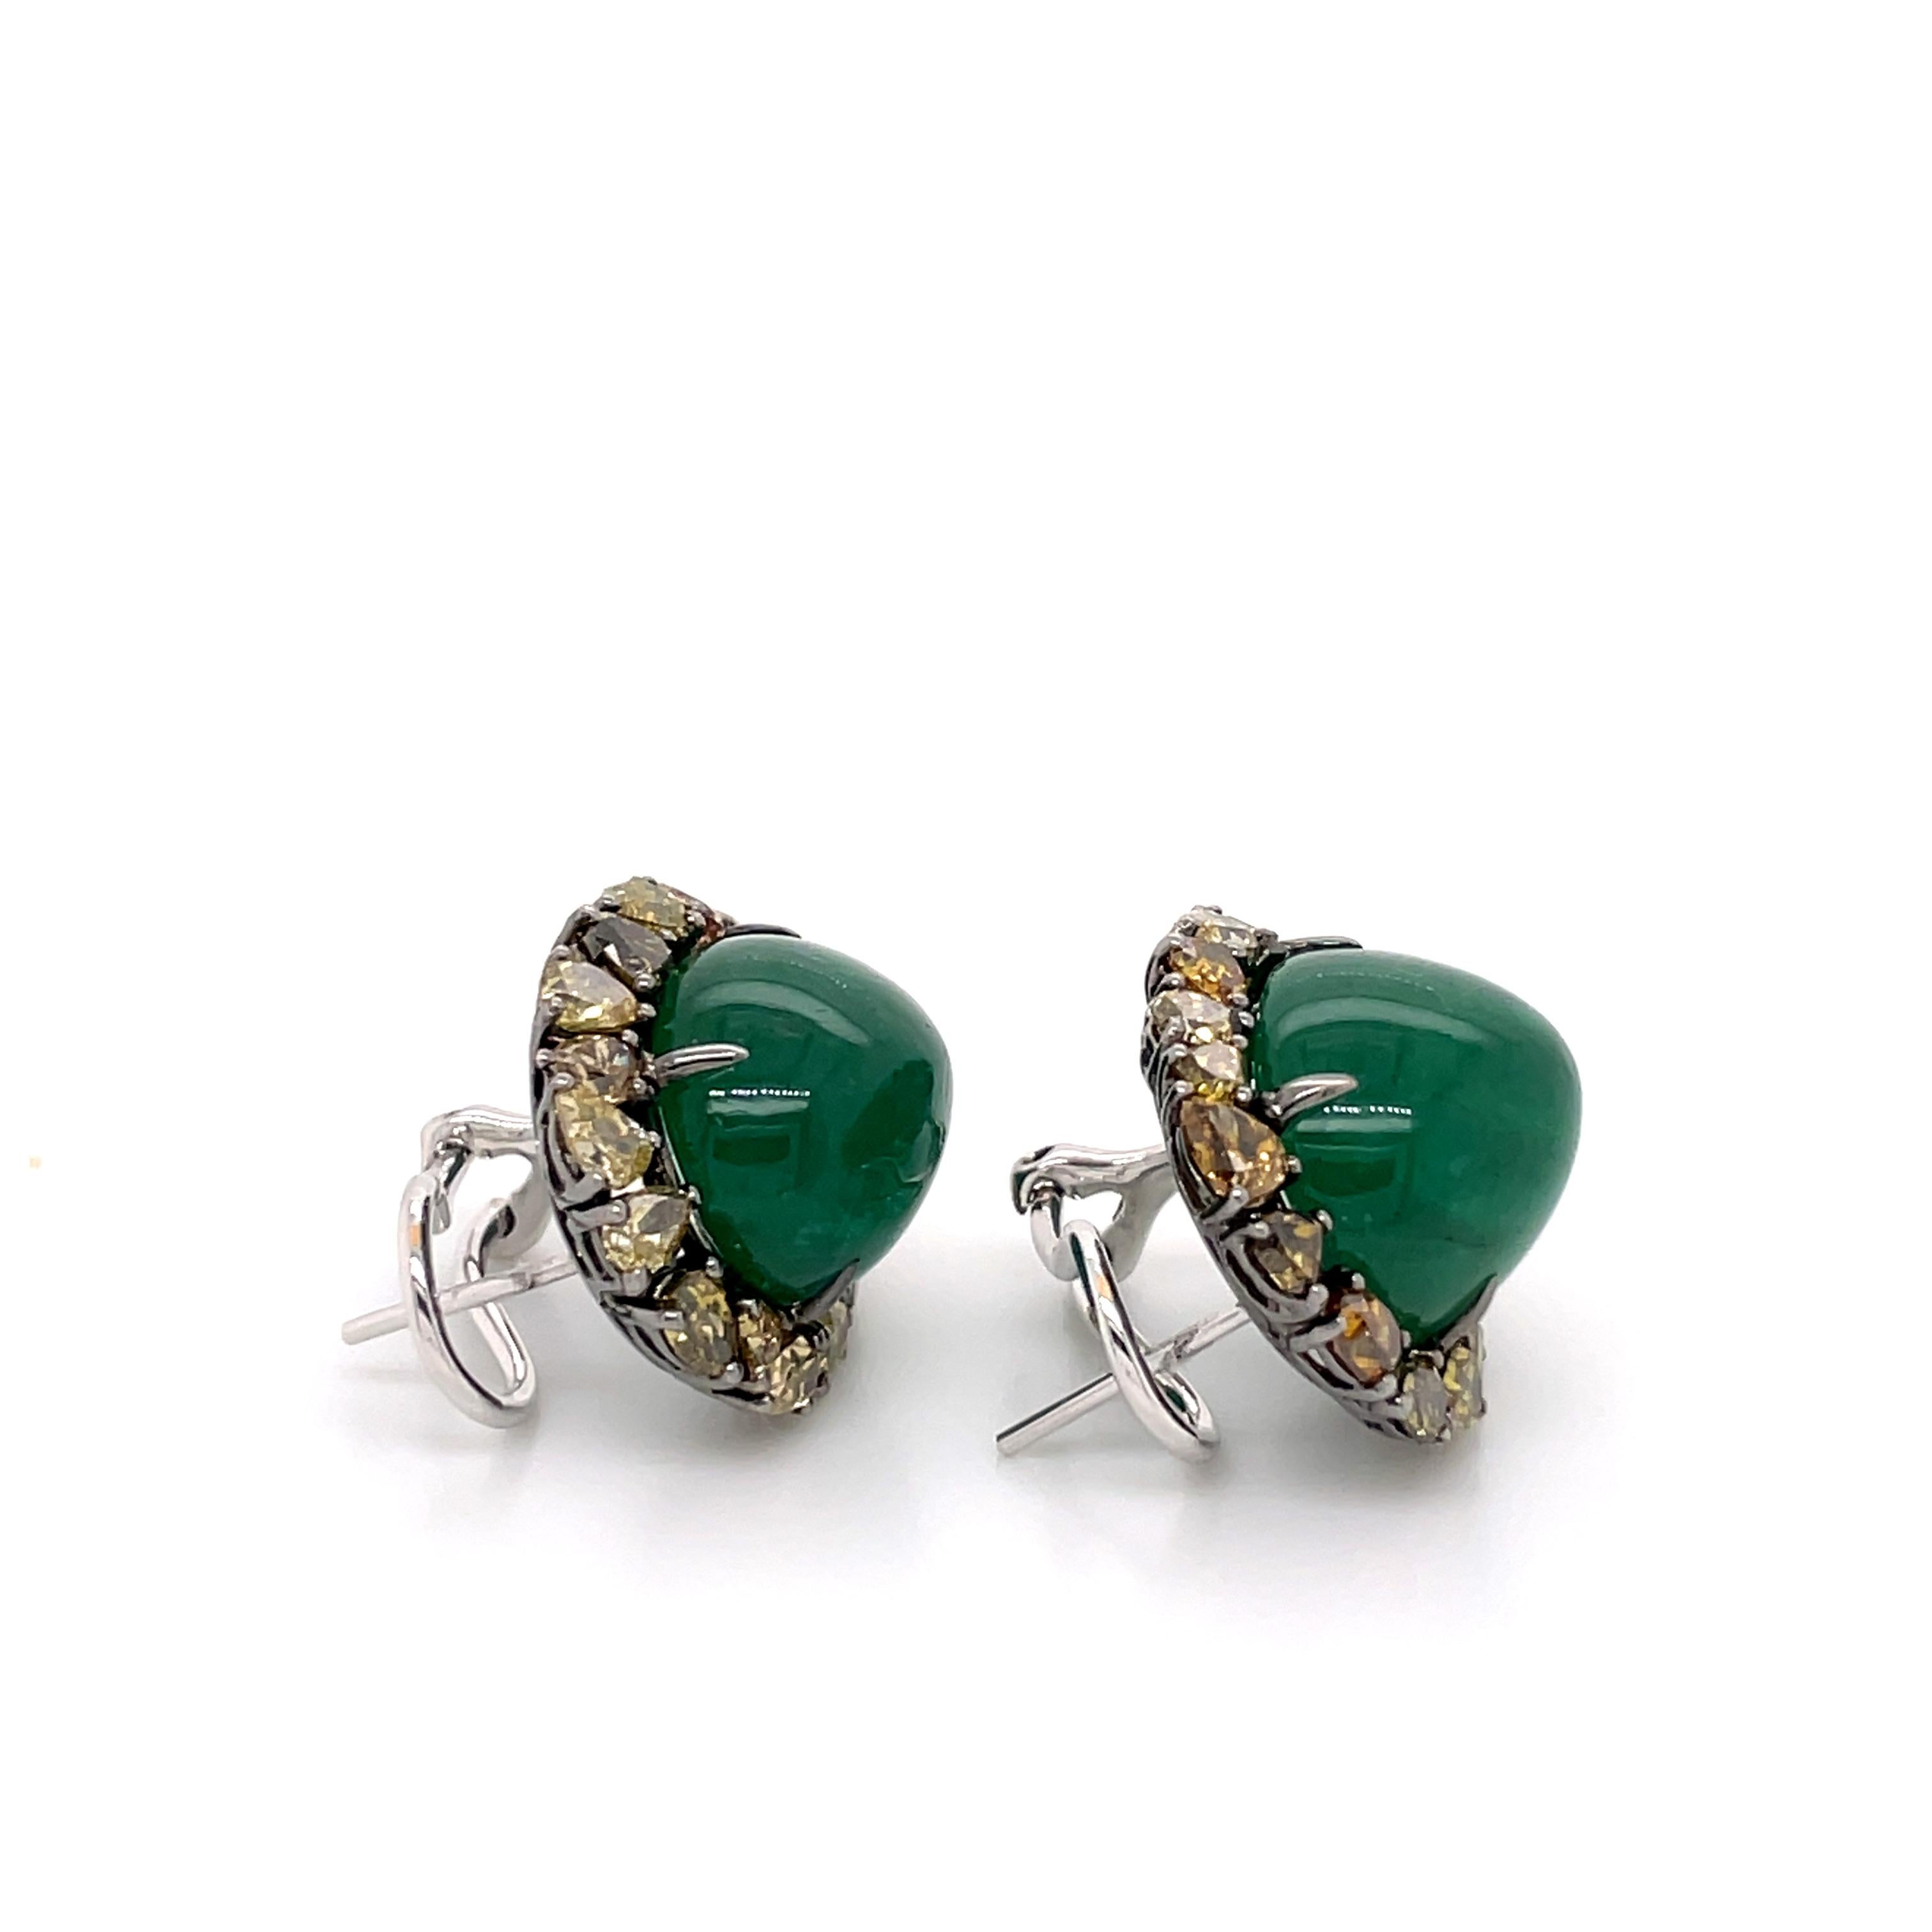 The Emerald and Fancy Diamond Stud Cocktail Earrings are a stunning pair of earrings that exude elegance and sophistication. Crafted with meticulous attention to detail, these earrings feature a combination of vibrant emeralds and dazzling fancy